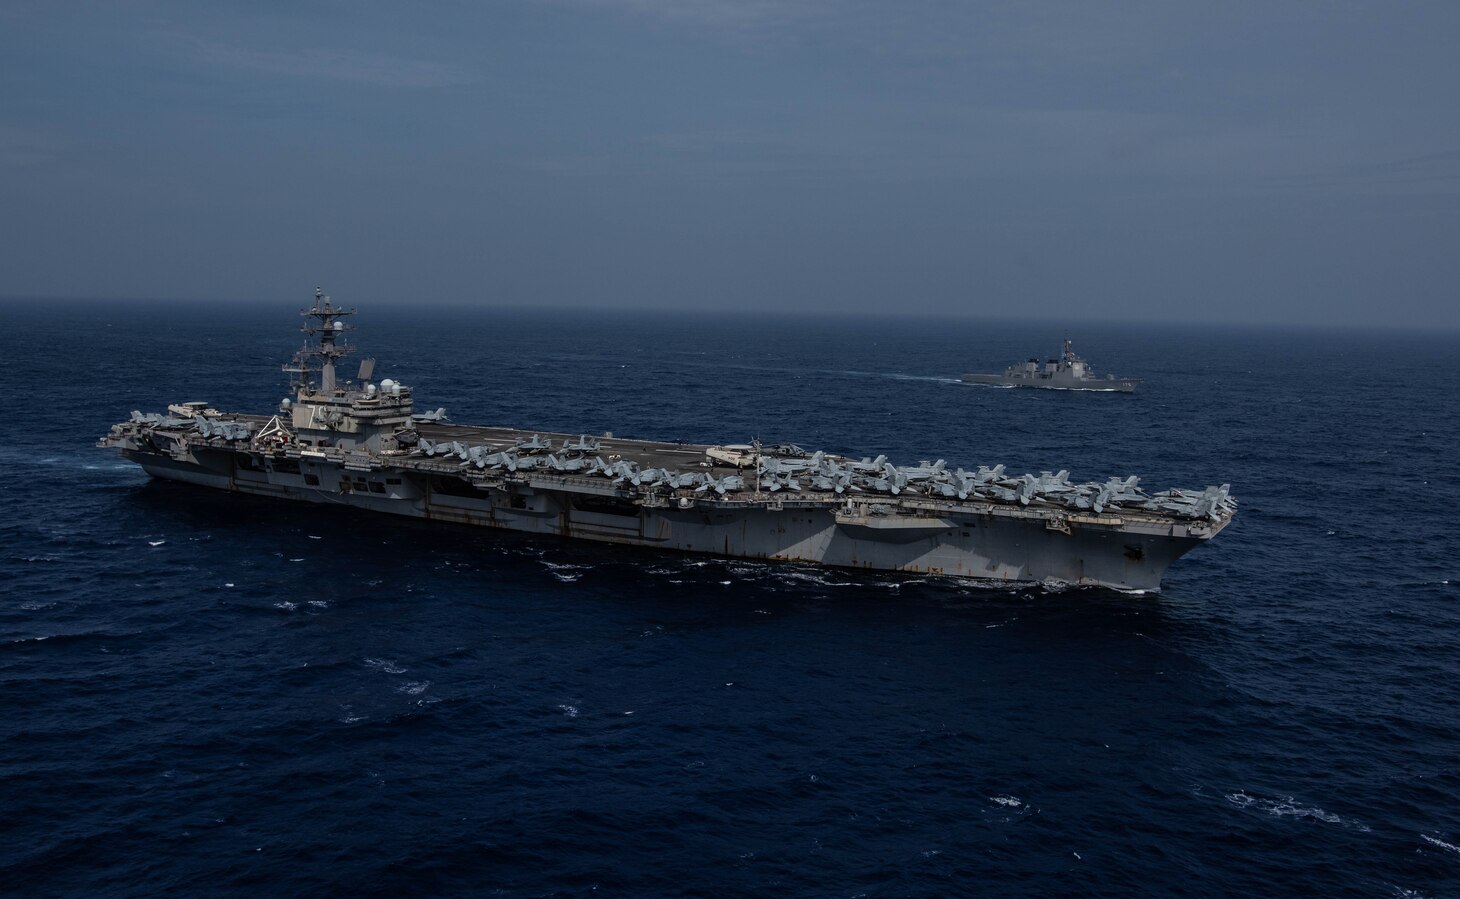 PHILIPPINE SEA (August 15, 2019) The Navy’s forward-deployed aircraft carrier USS Ronald Reagan (CVN 76) sails alongside the Japan Maritime Self-Defense Force guided-missile destroyer JS Myoko (DDG-175) while underway. The Navy and JMSDF regularly operate, train and exercise together to improve interoperability and strengthen joint capabilities. Ronald Reagan, the flagship of Carrier Strike Group 5, provides a combat-ready force that protects and defends the collective maritime interests of its allies and partners in the Indo-Pacific region.